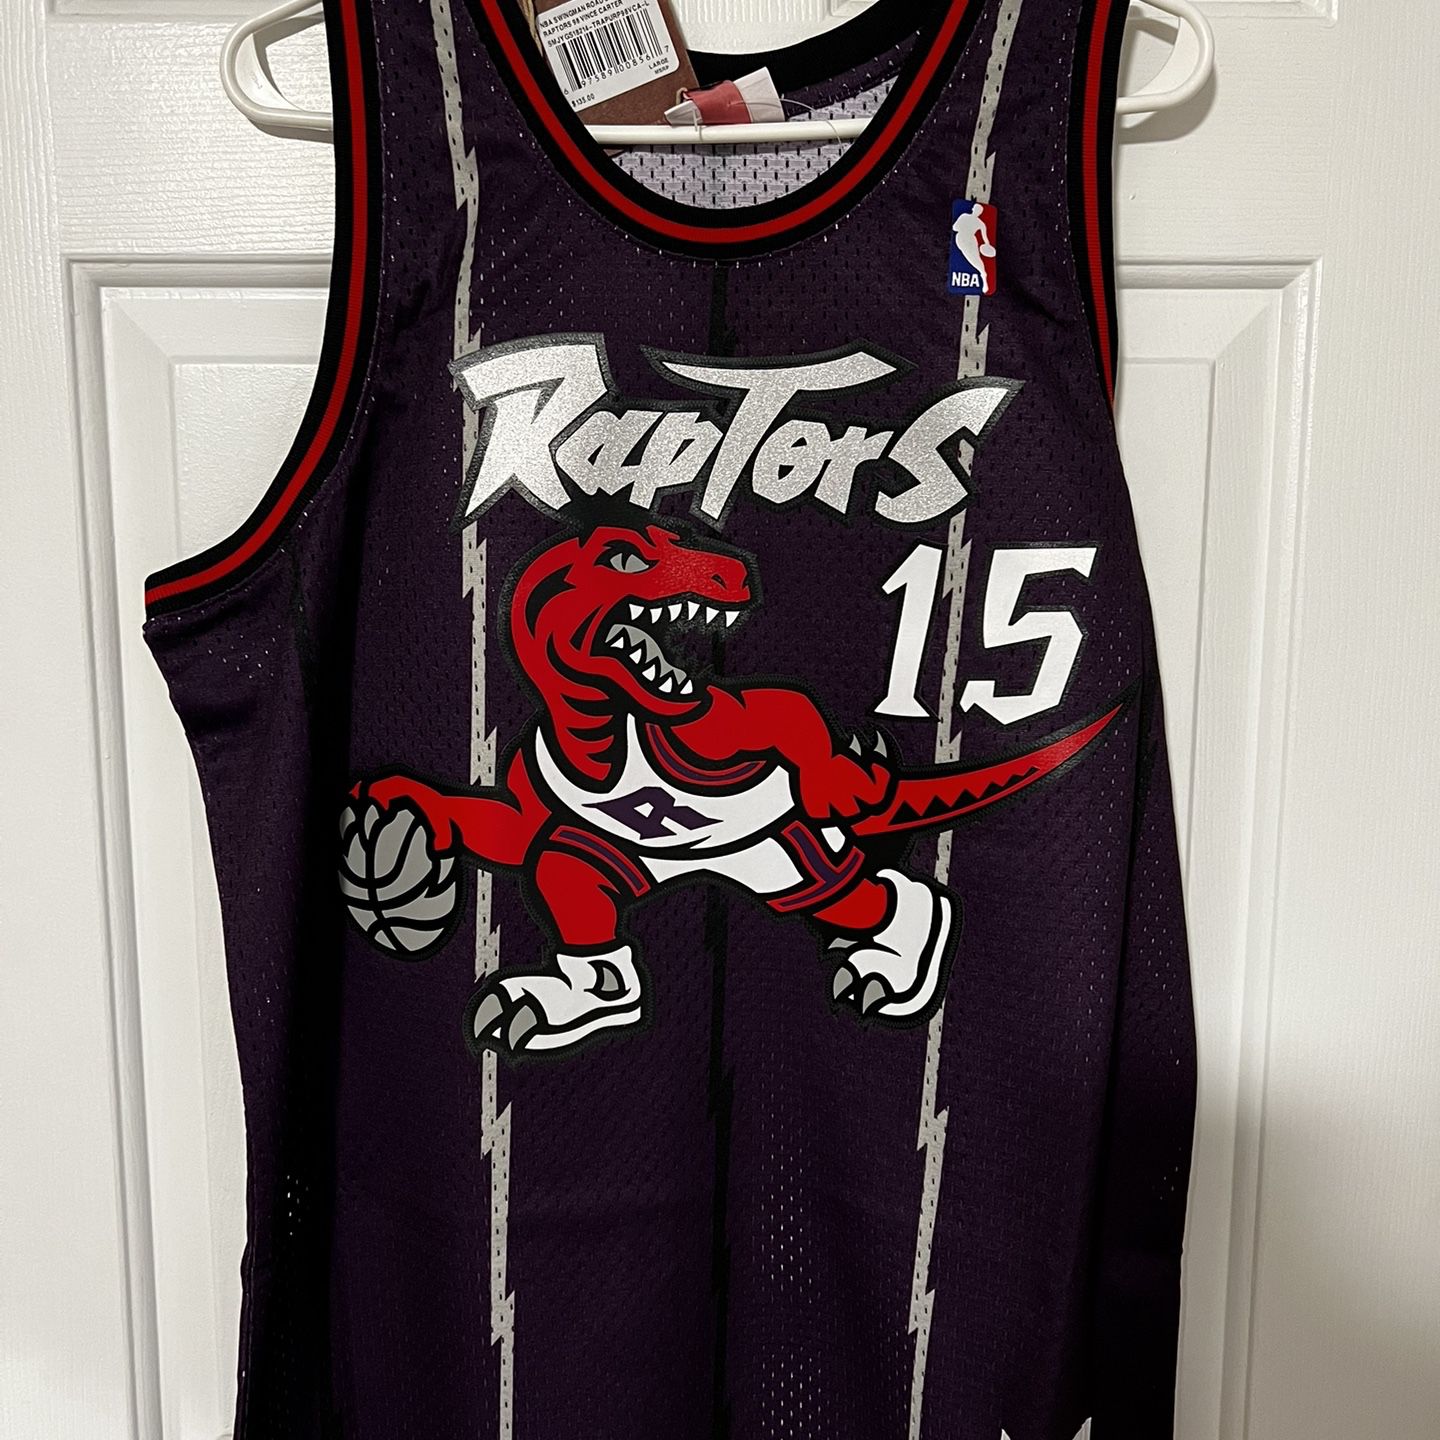 1998-99 Vince Carter Hardwood Classic M' Toronto Raptors Jersey for Sale in  Lincoln, CA - OfferUp